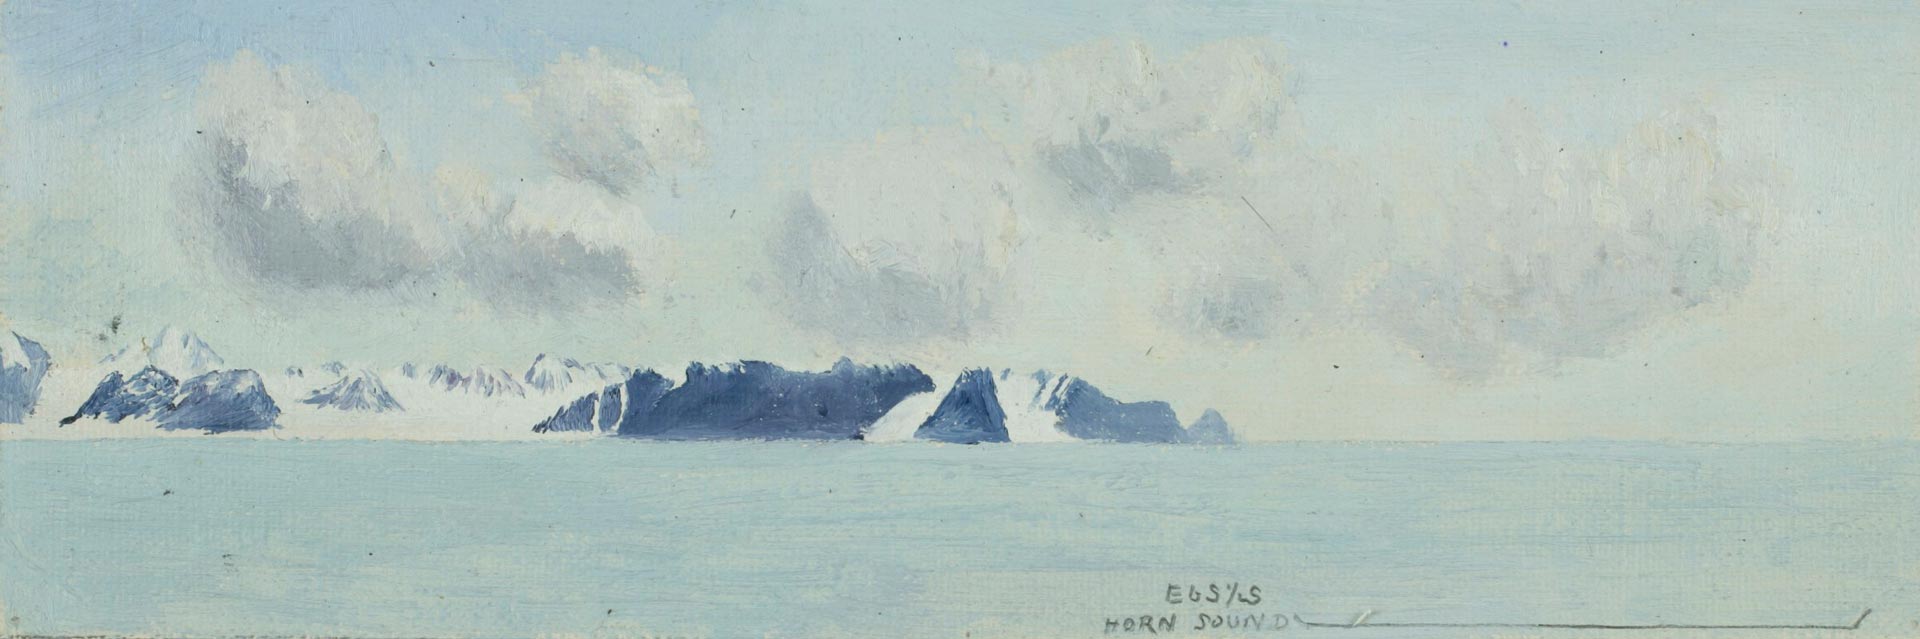 Arctic illustration: Painting of Horn Sound. Artwork reproduced with kind permission of The Scott Polar Research Institute, University of Cambridge UK